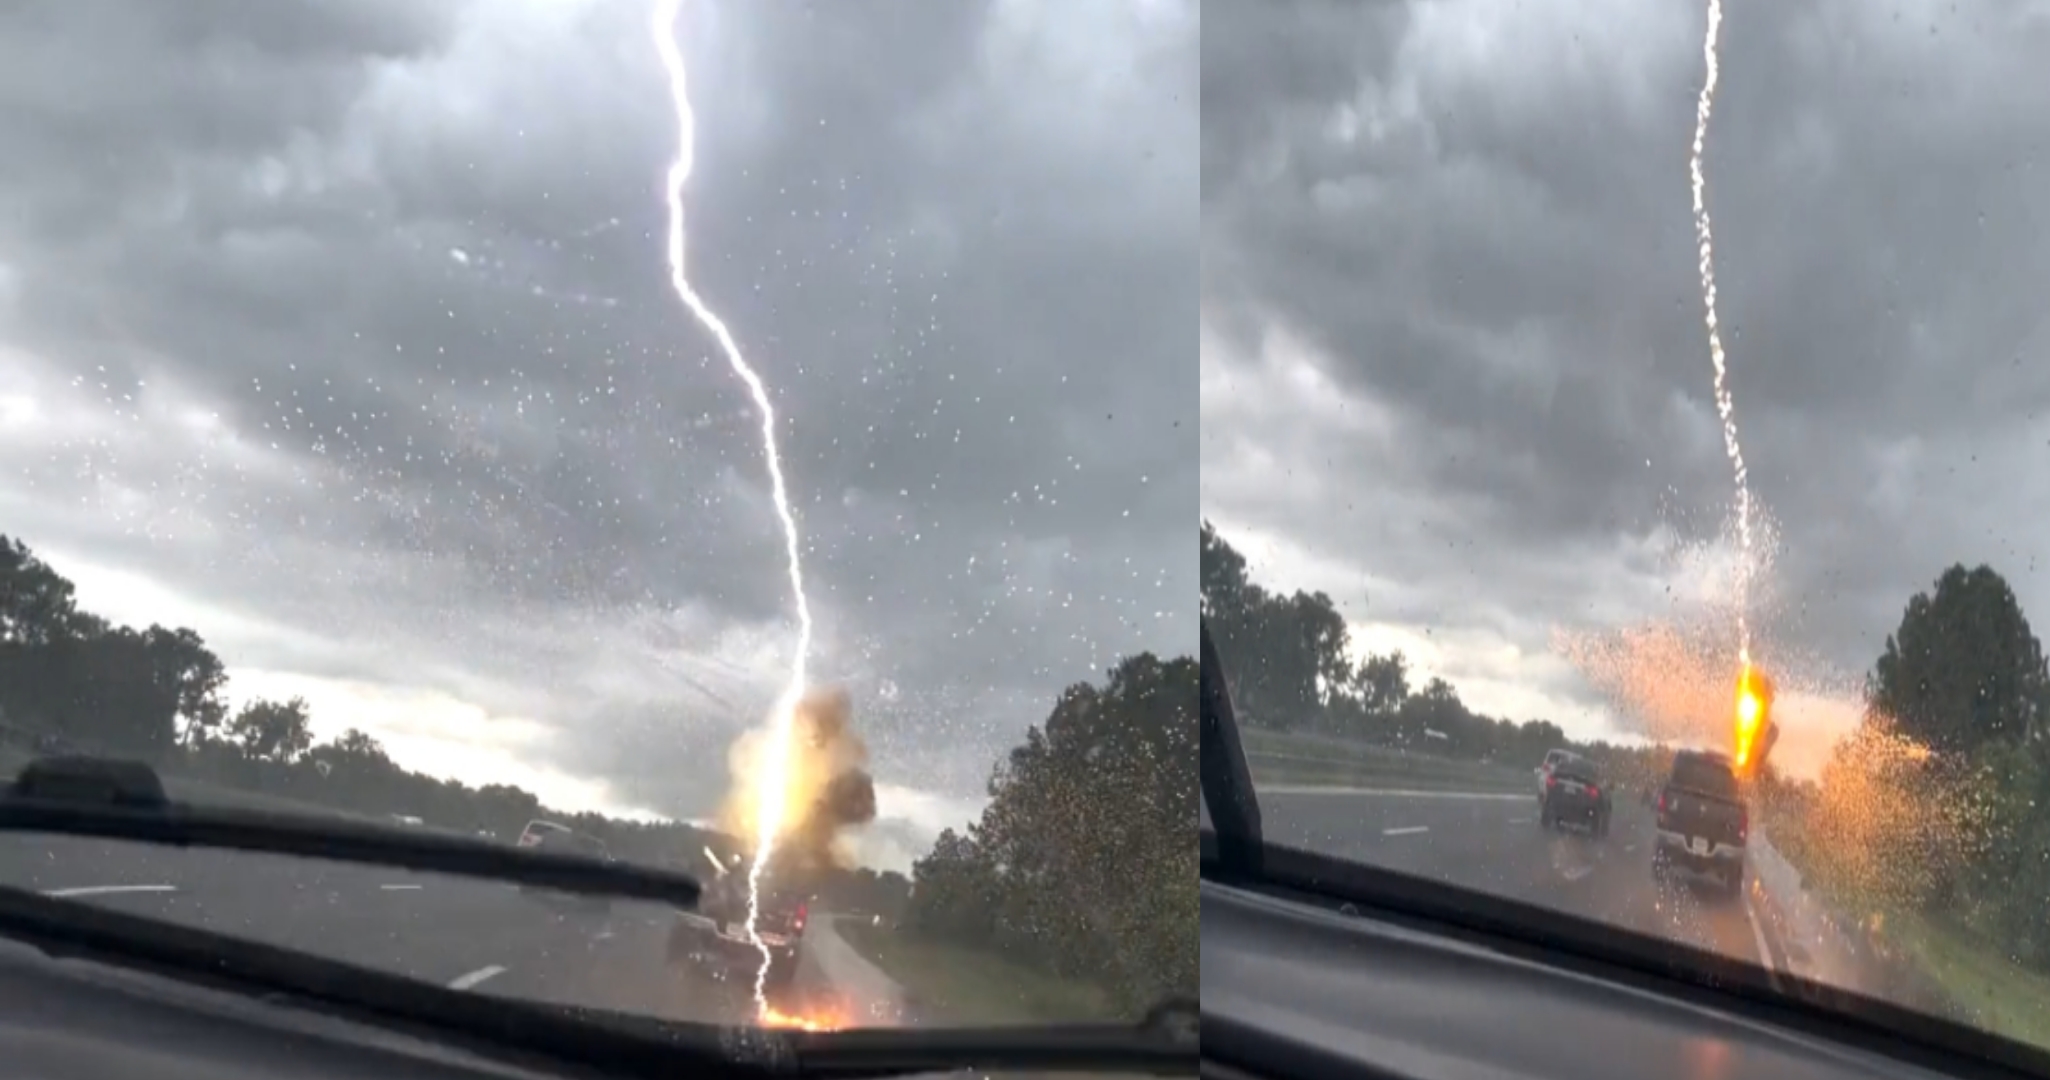 The wife caught the lightning falling from the sky in her camera, video viral on social media